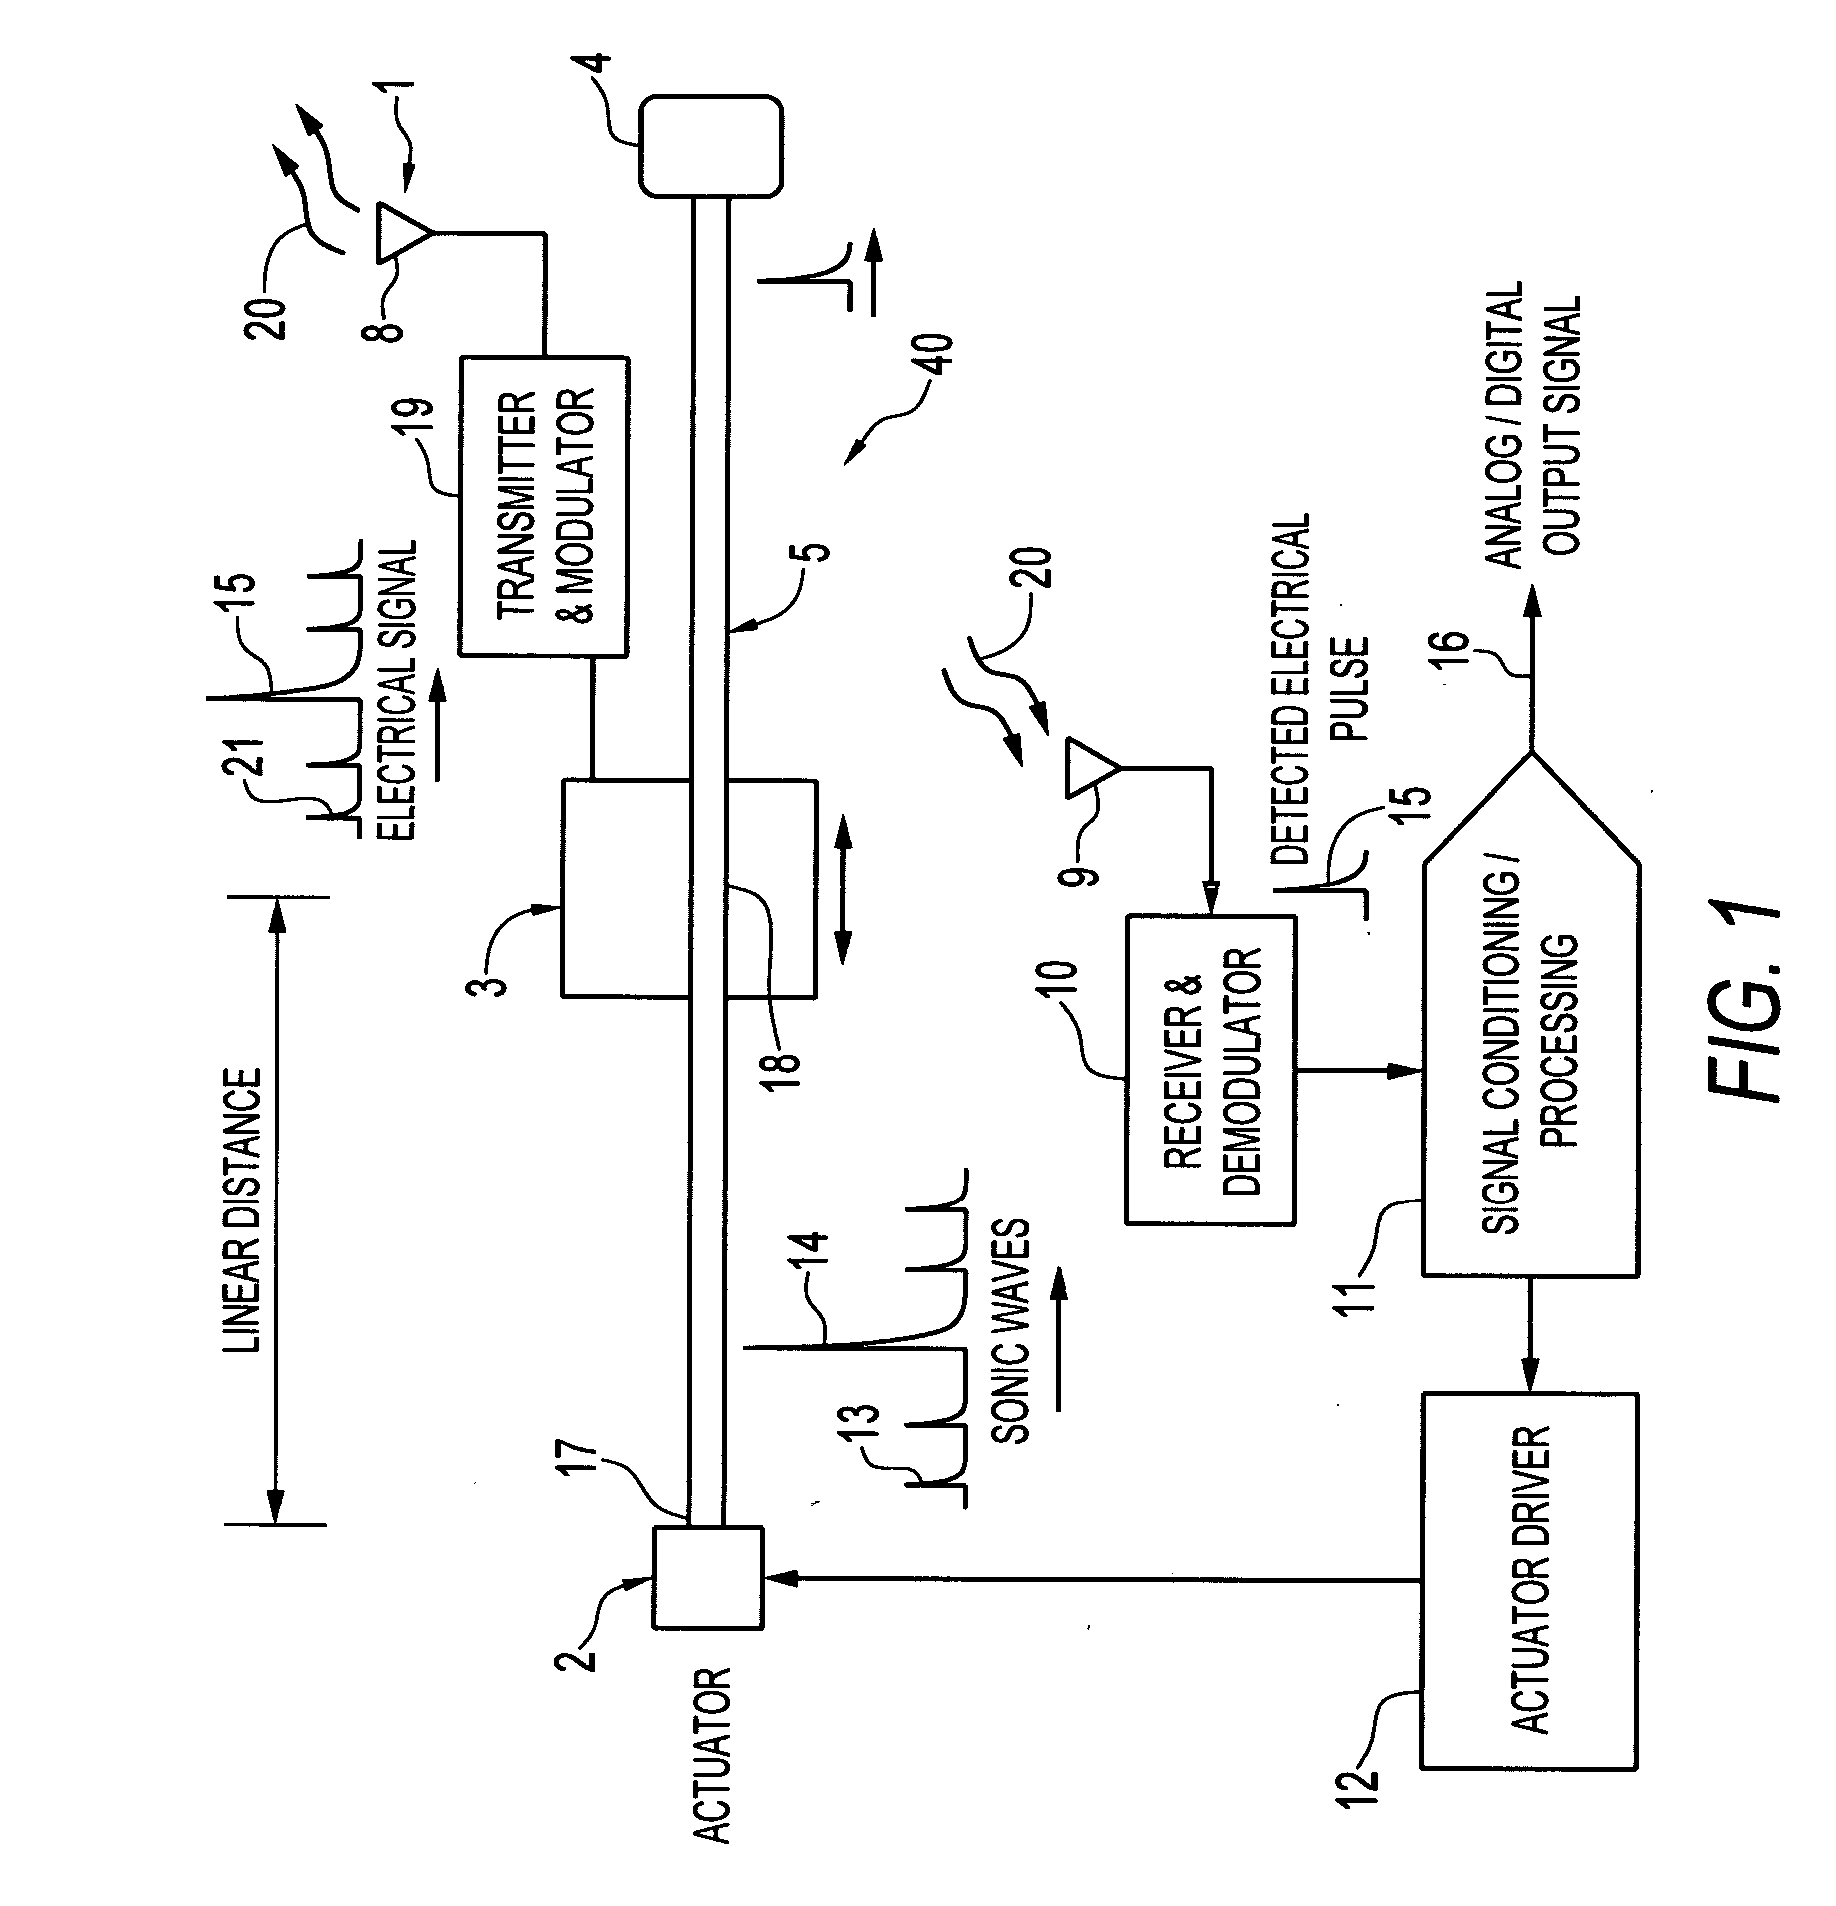 Apparatus and method for measuring the position of a member